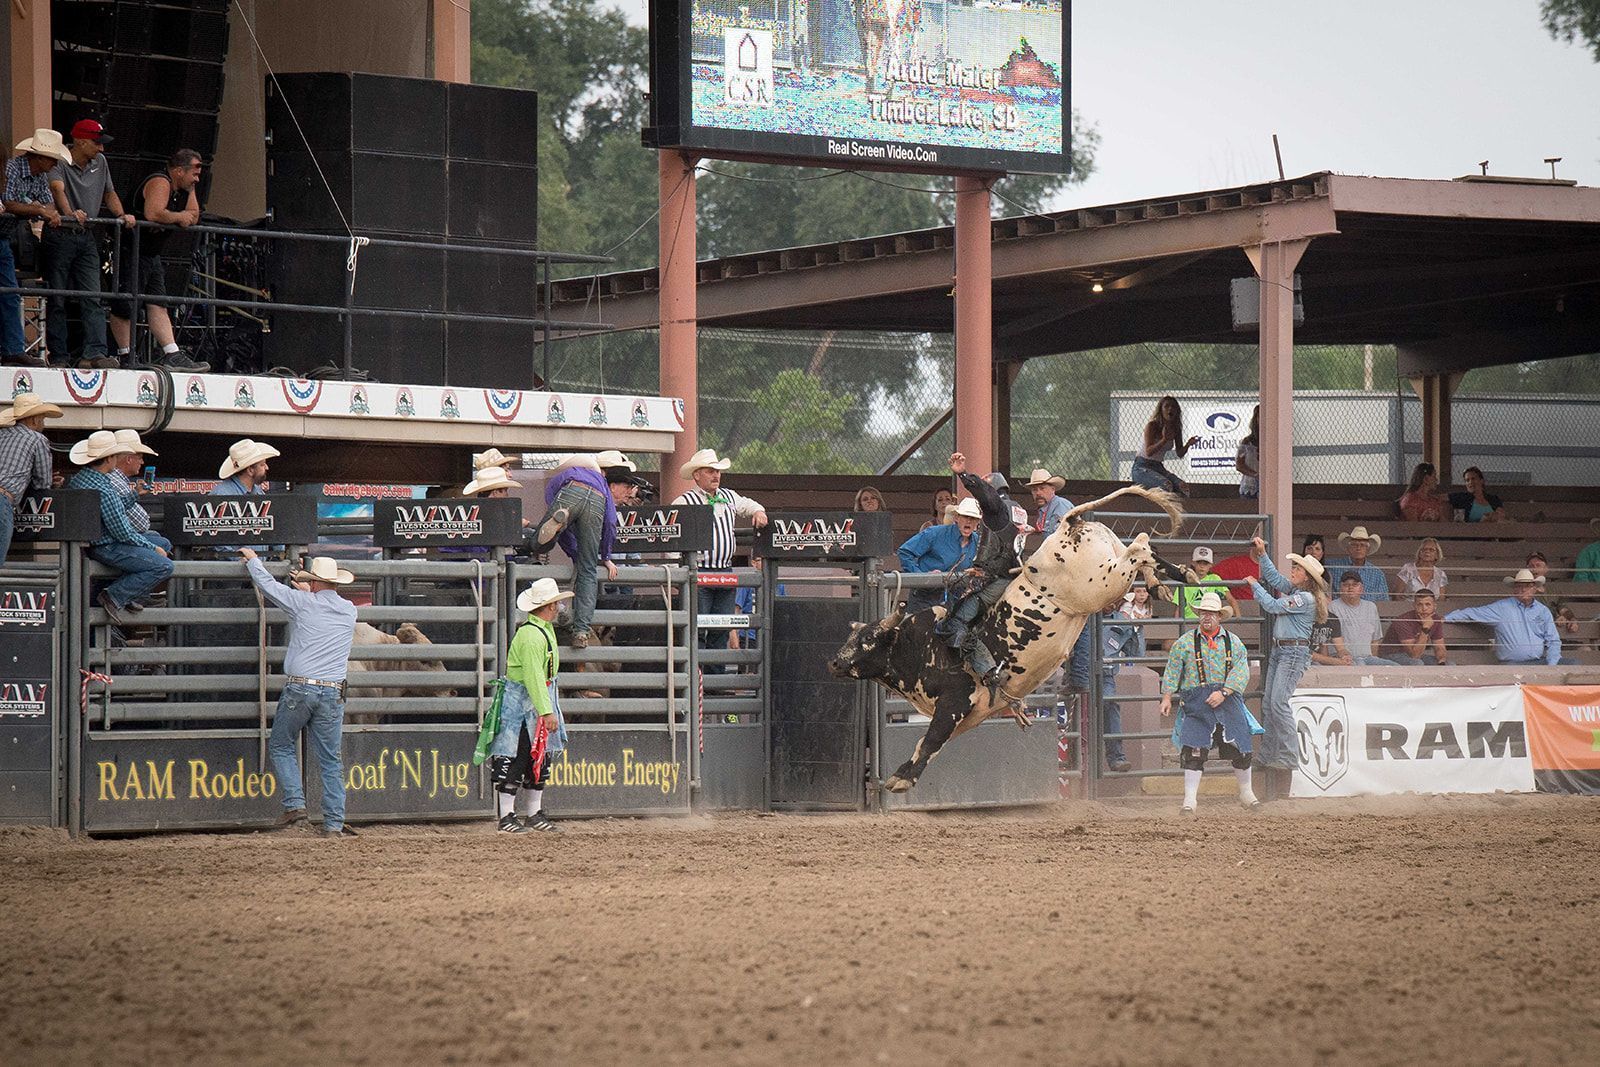 Rodeo cow kicking its hind legs up at the Colorado State Fair rodeo